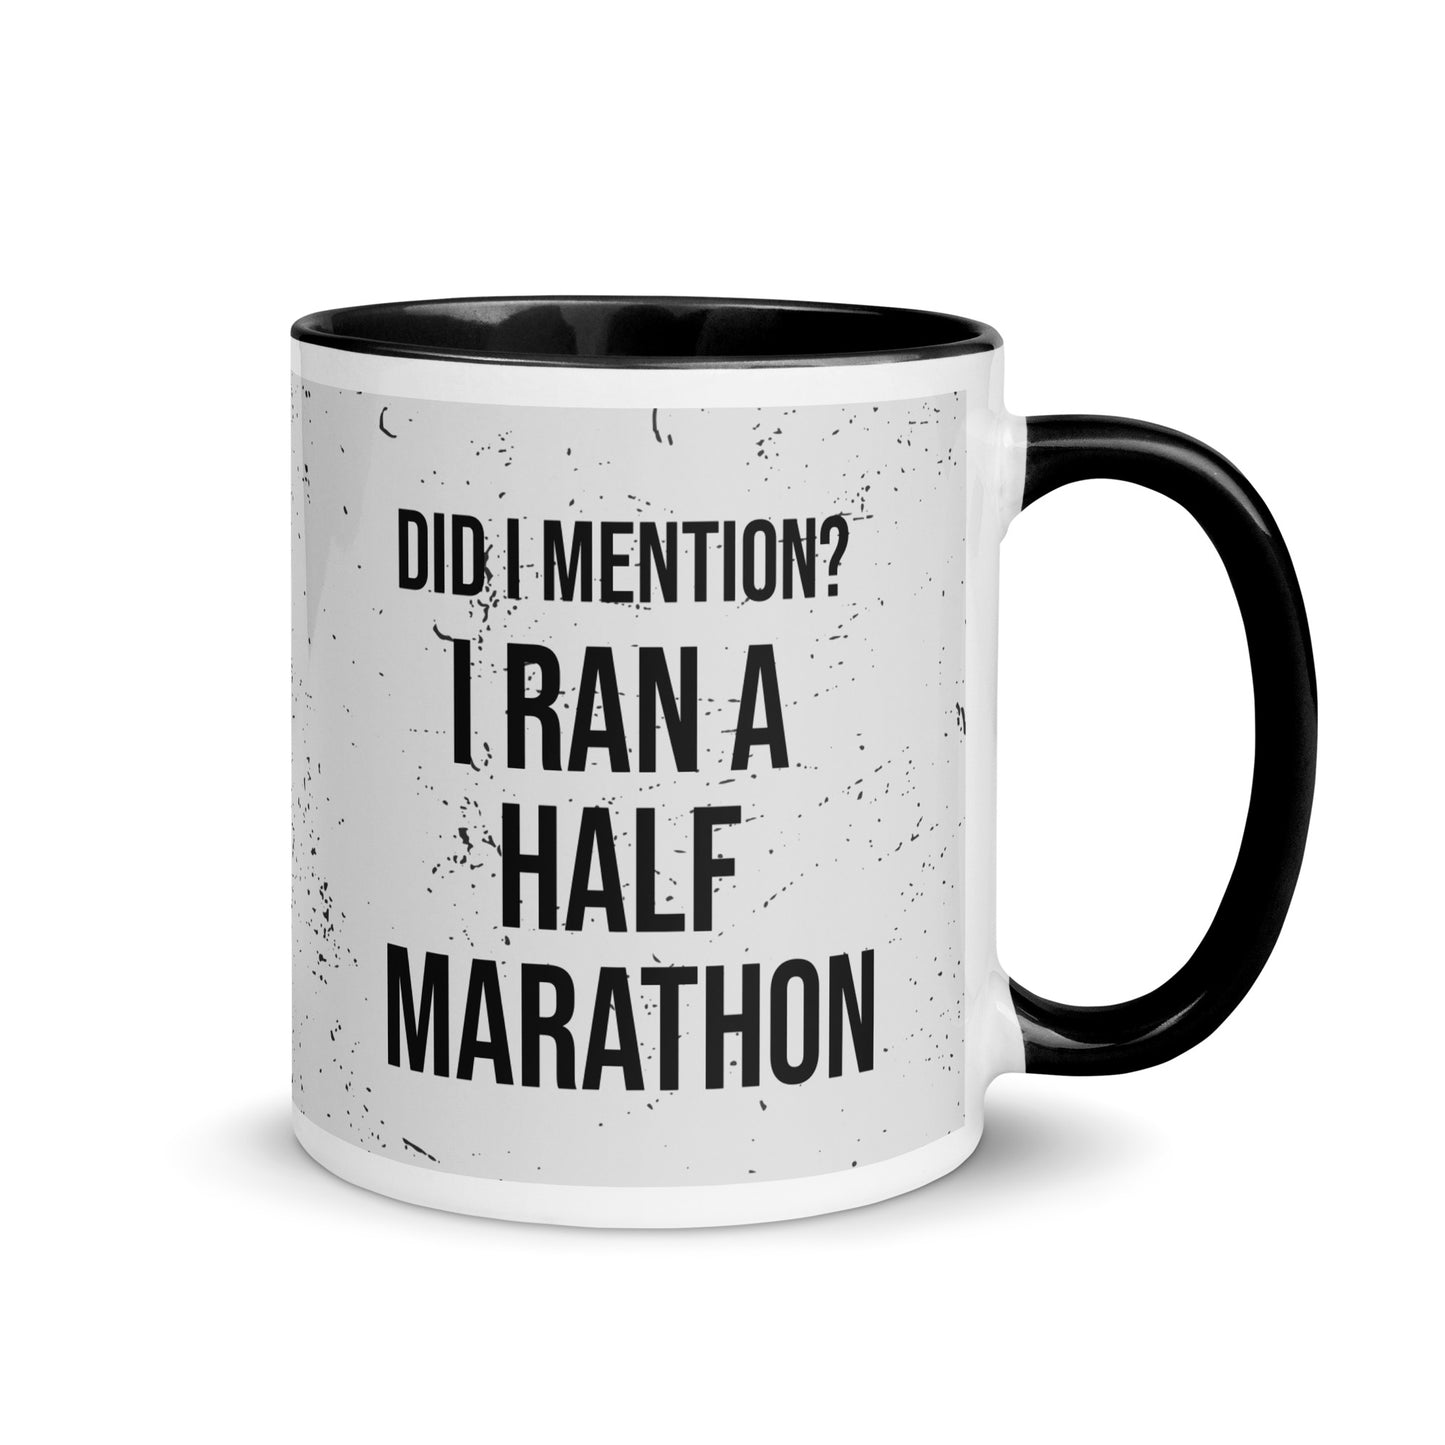 black handled mug with the words did I mention? I ran a half marathon in a bold font across a splatter effect background